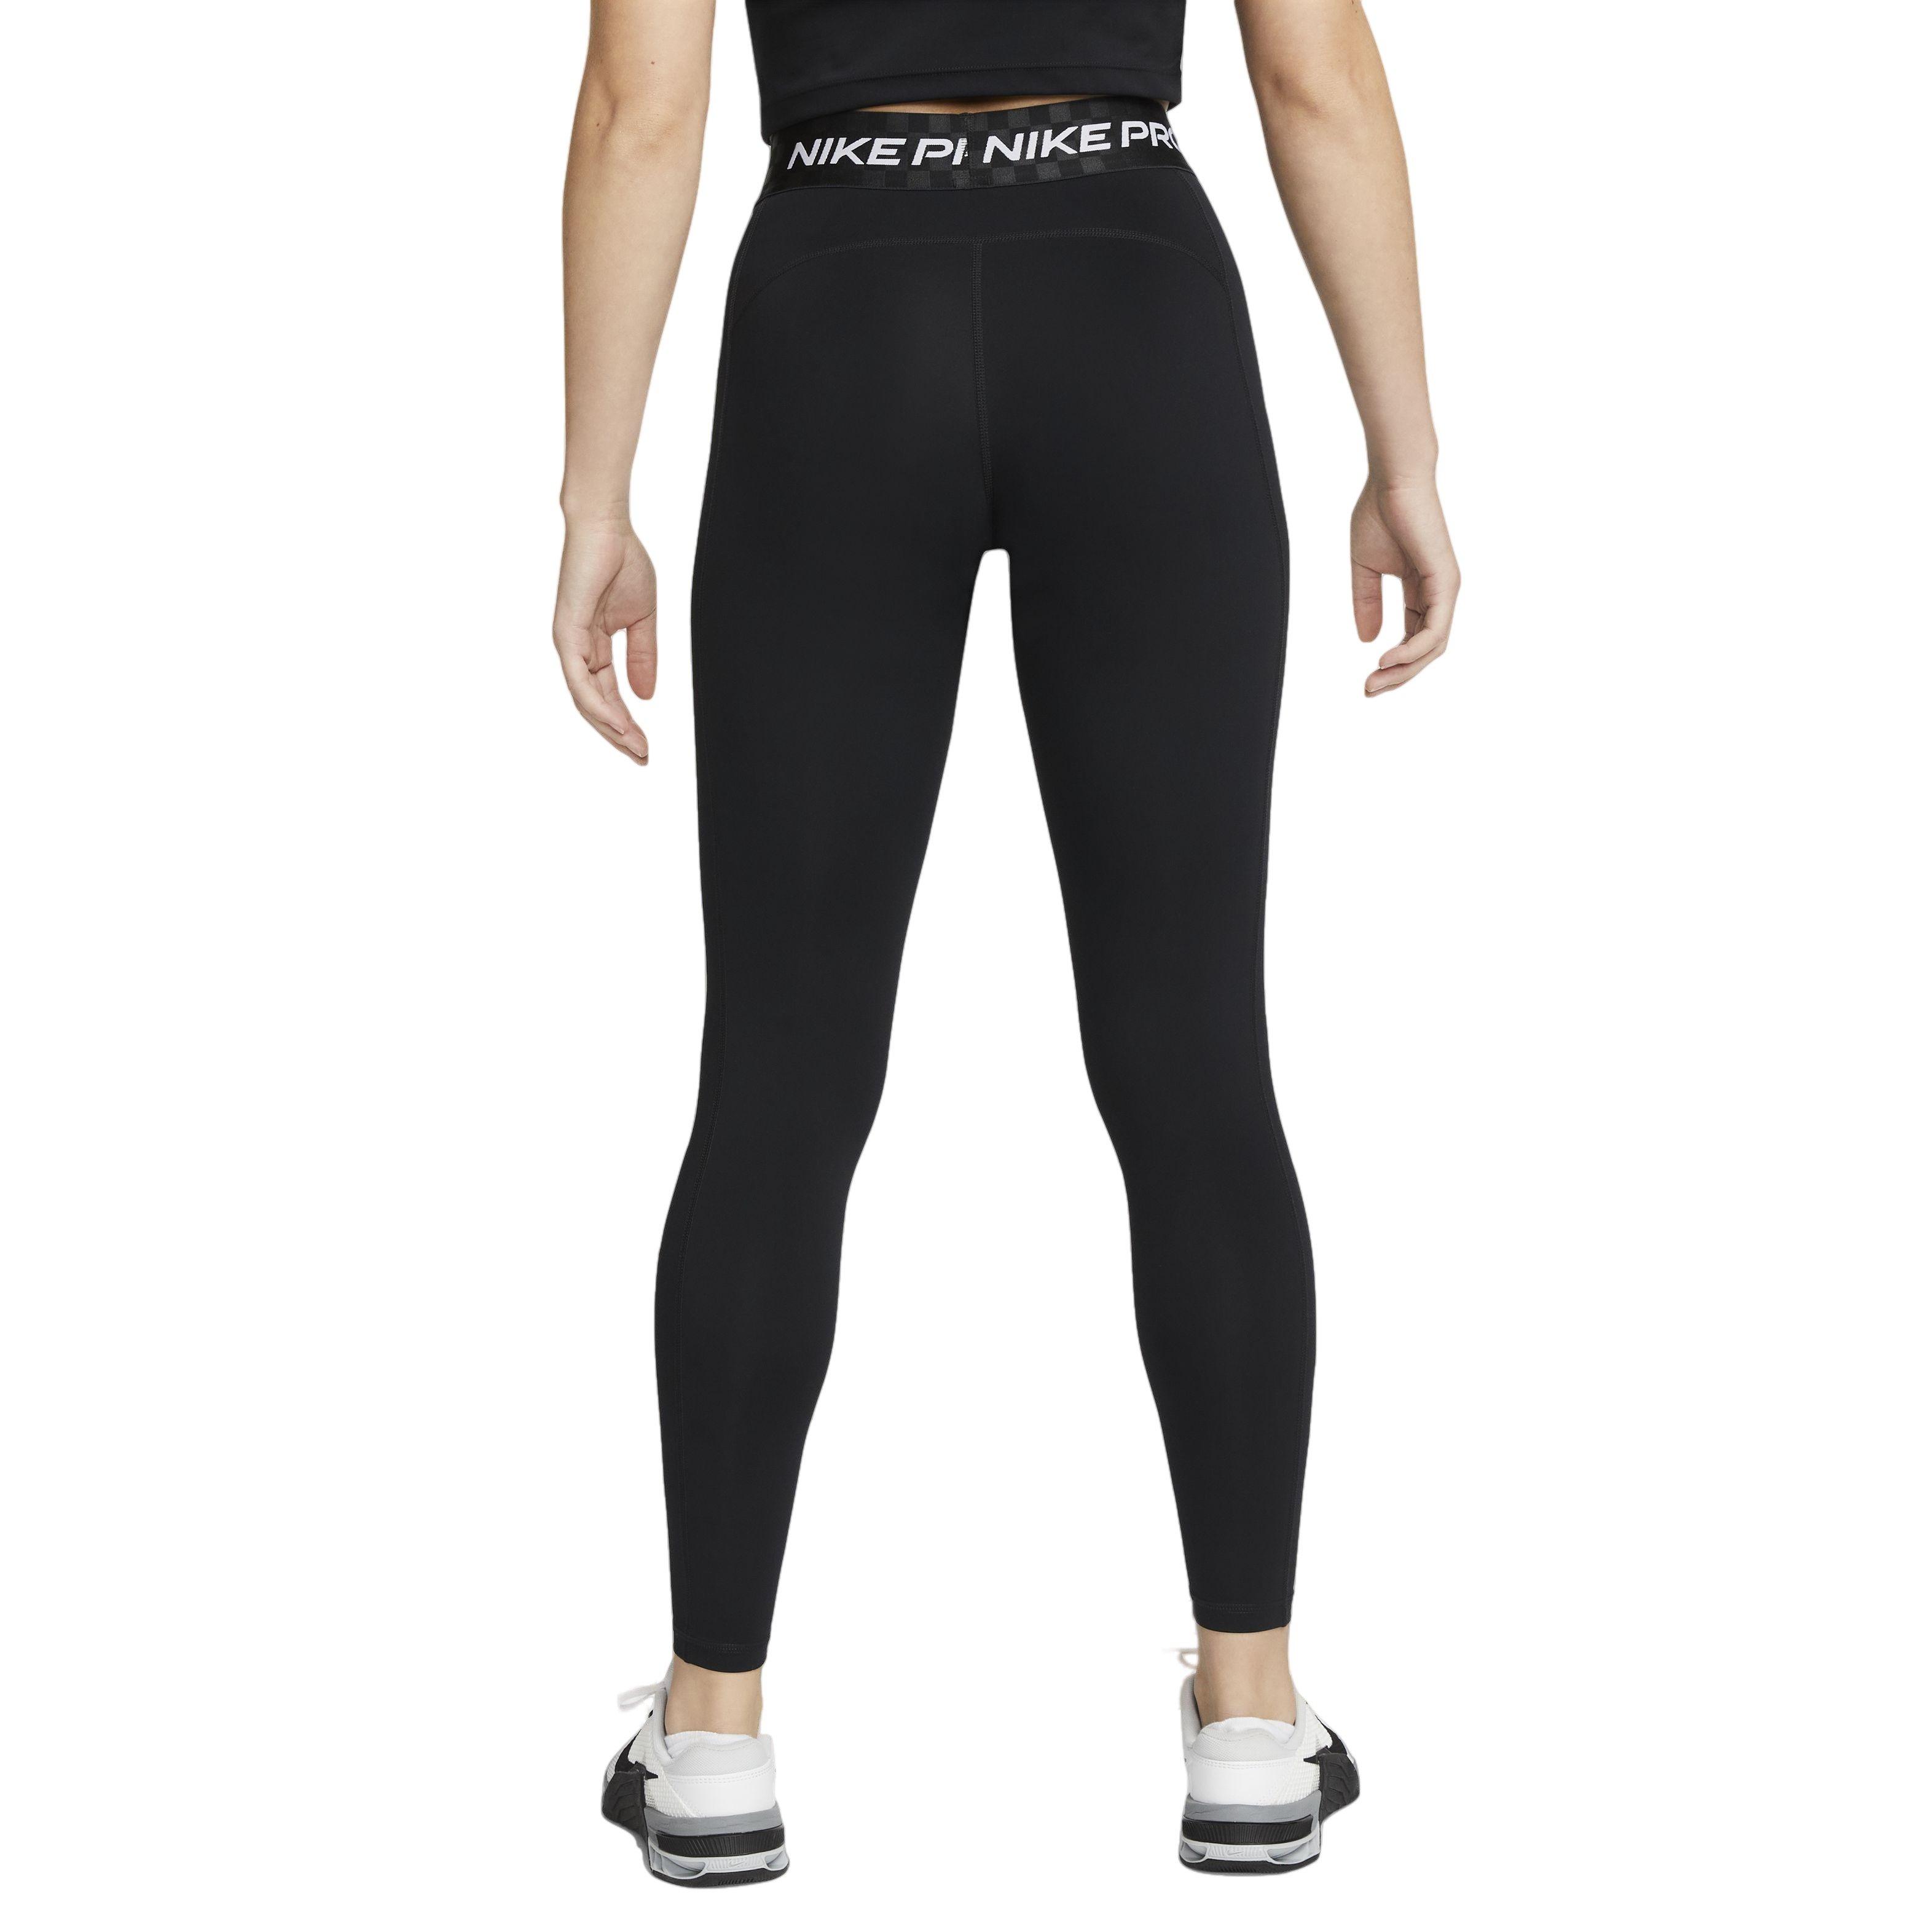 NIKE PRO DRI FIT GRAPHIC TRAINING GYM TIGHTS TANK SET OUTFIT DR7741-693 WOMEN  XS